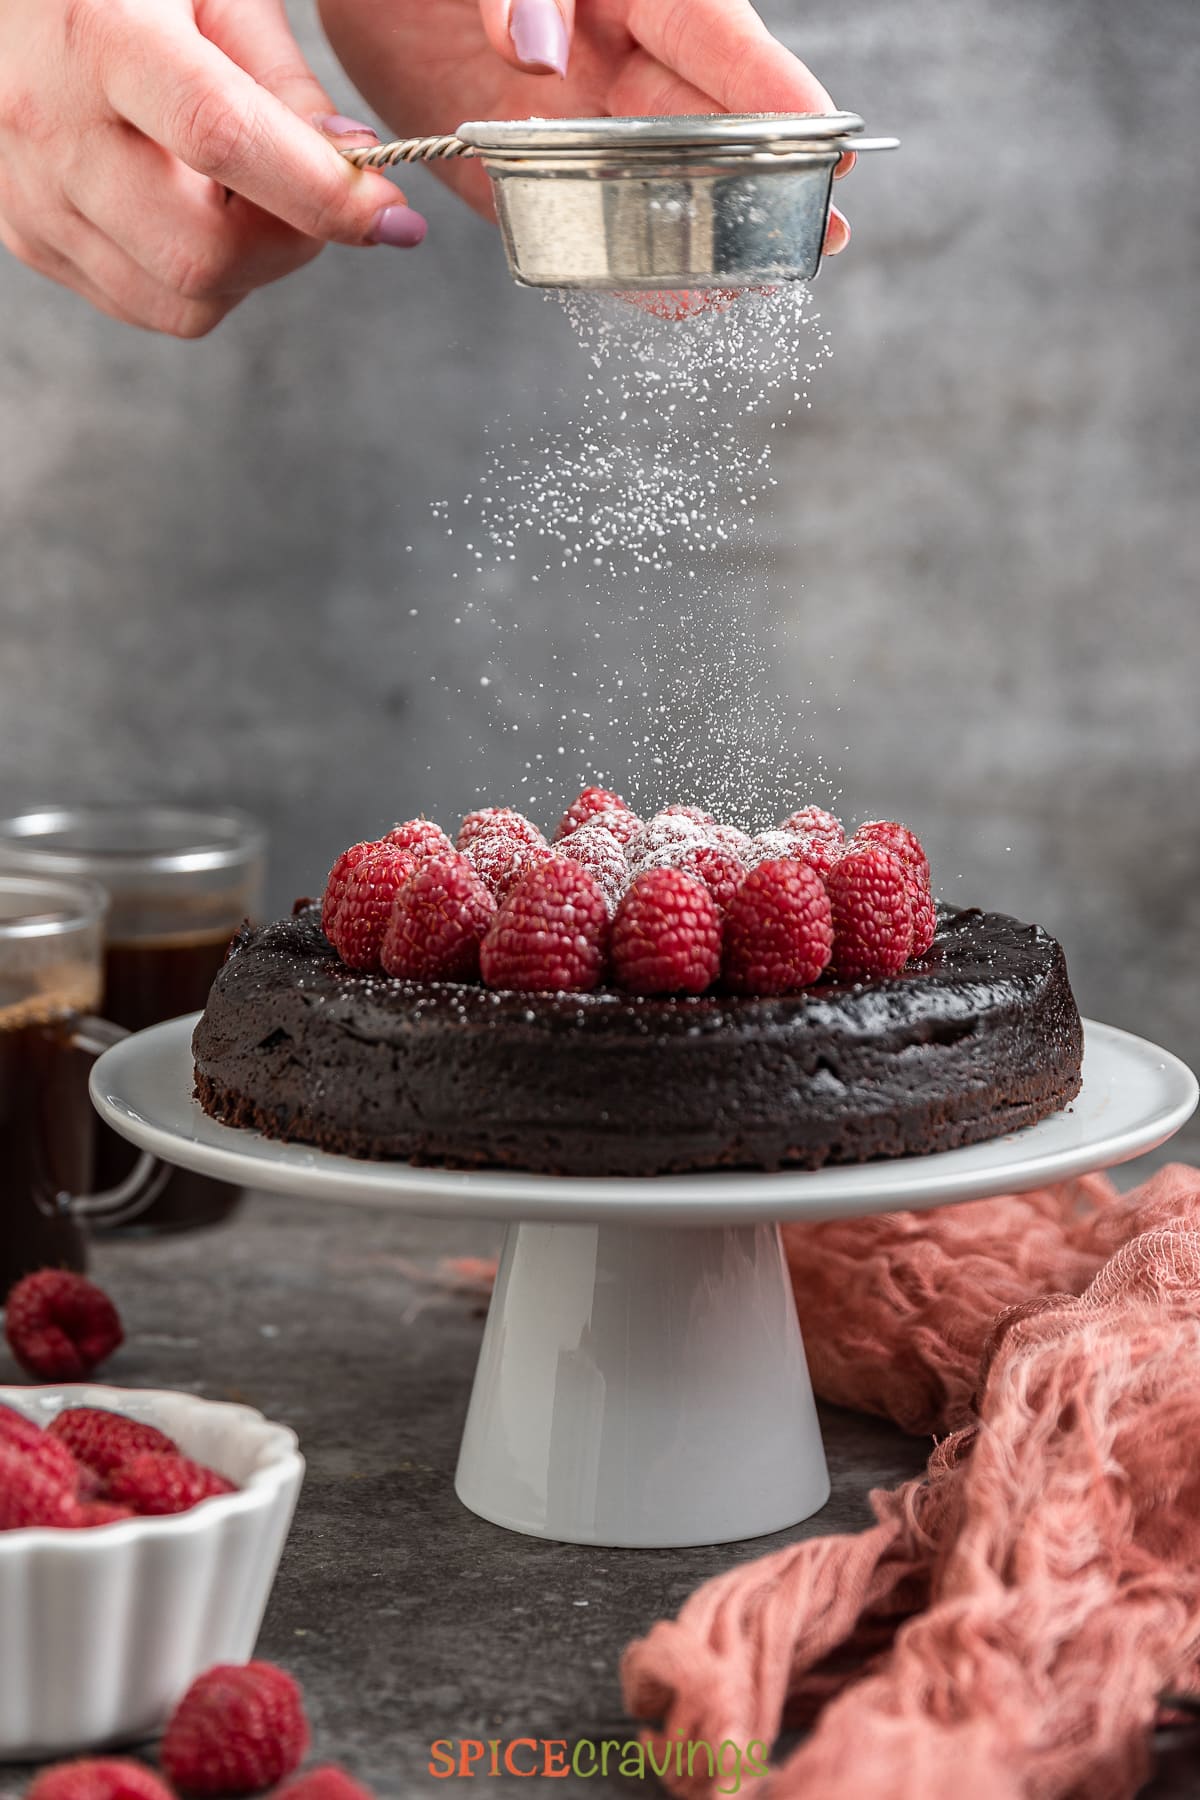 dusting powdered sugar over flourless chocolate cake topped with raspberries on cake stand